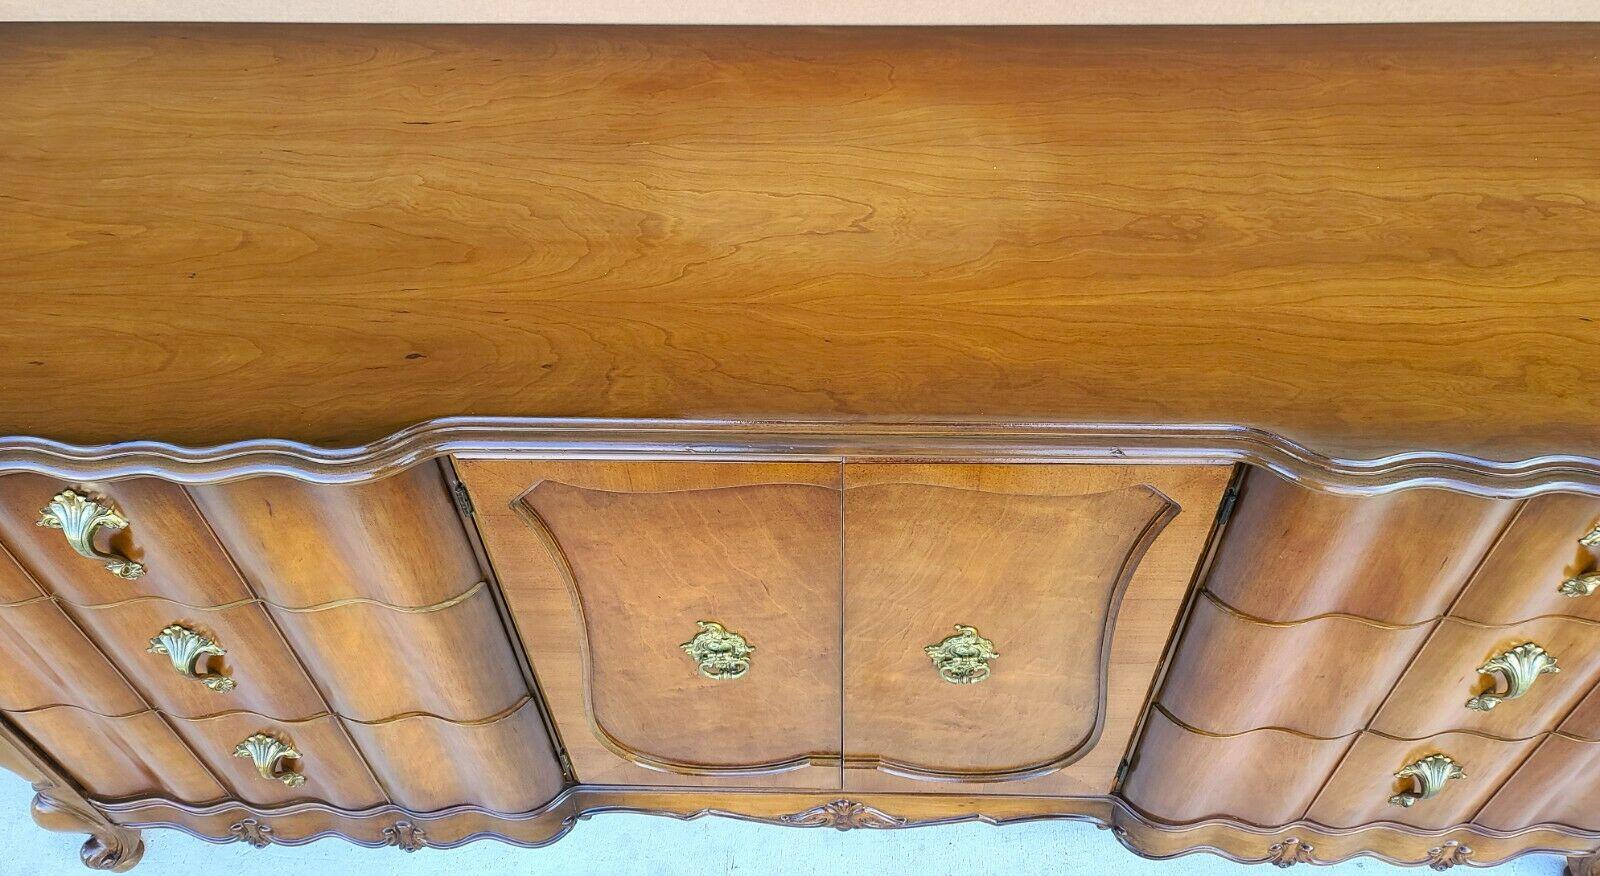 1970's french provincial bedroom furniture